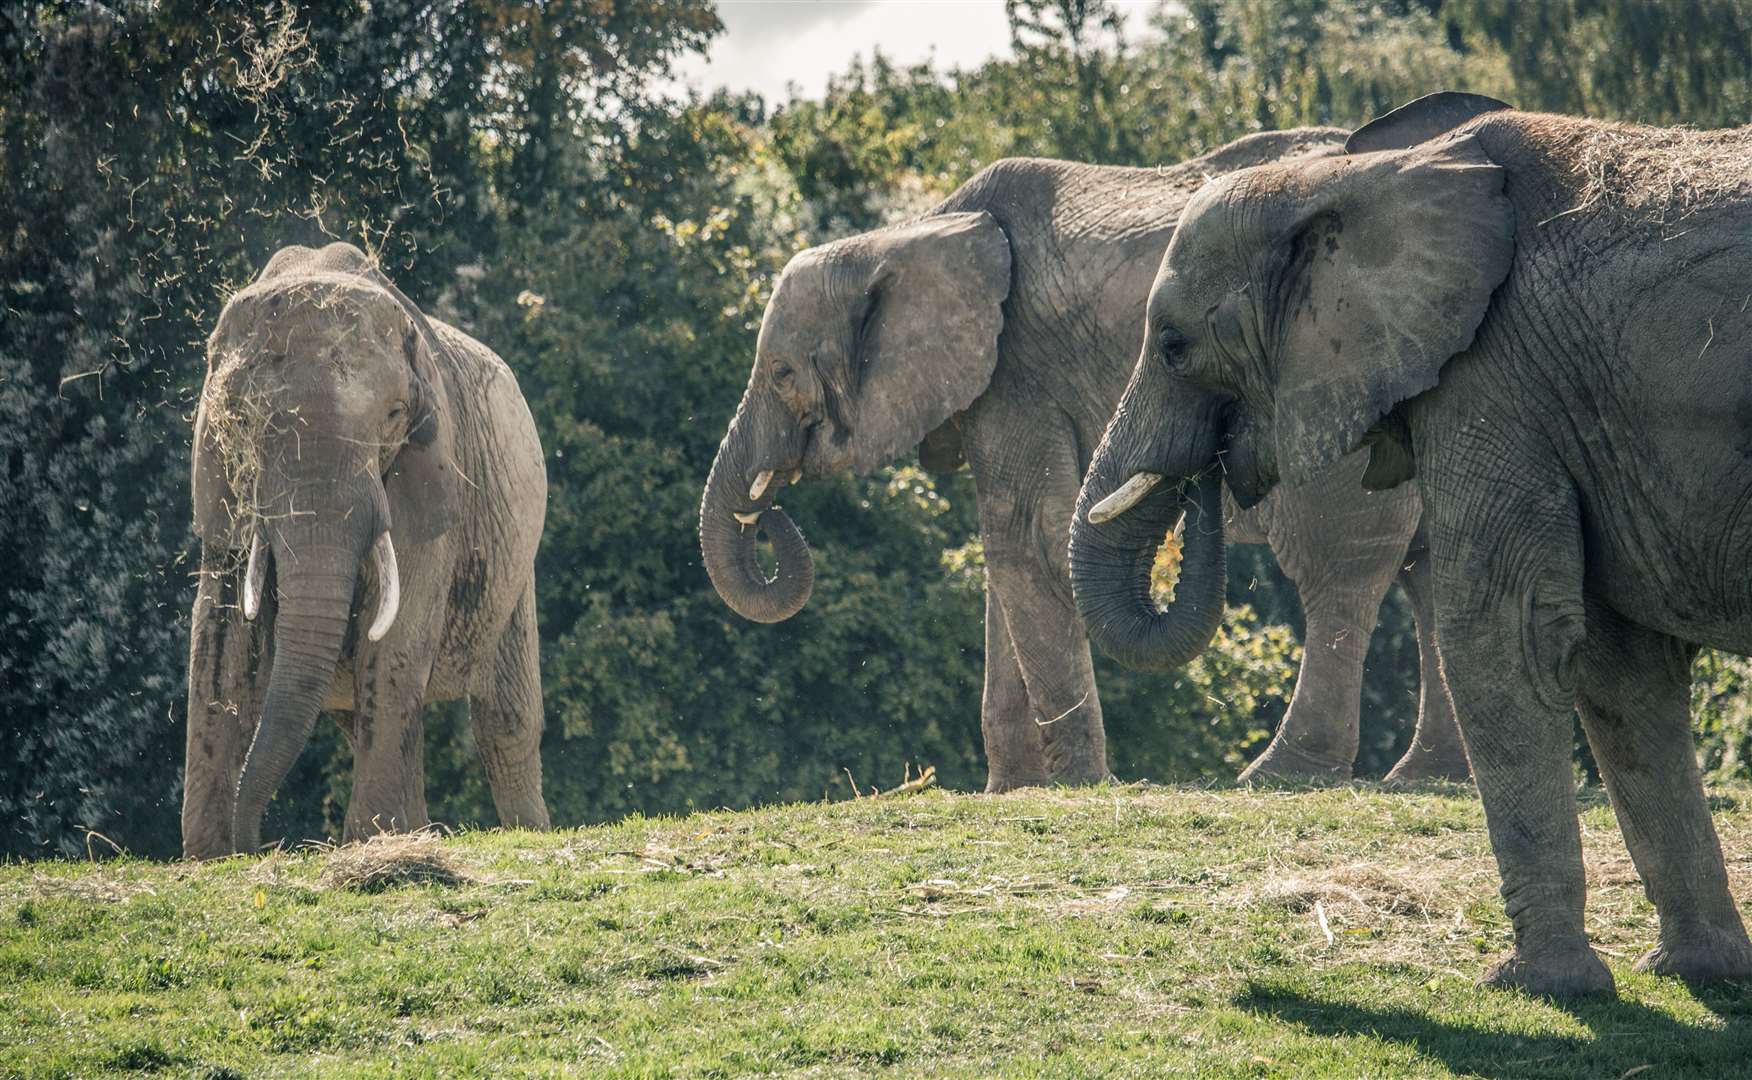 Give a wave to the elephants as you pass them on the 5k route through Howletts Wild Animal Park